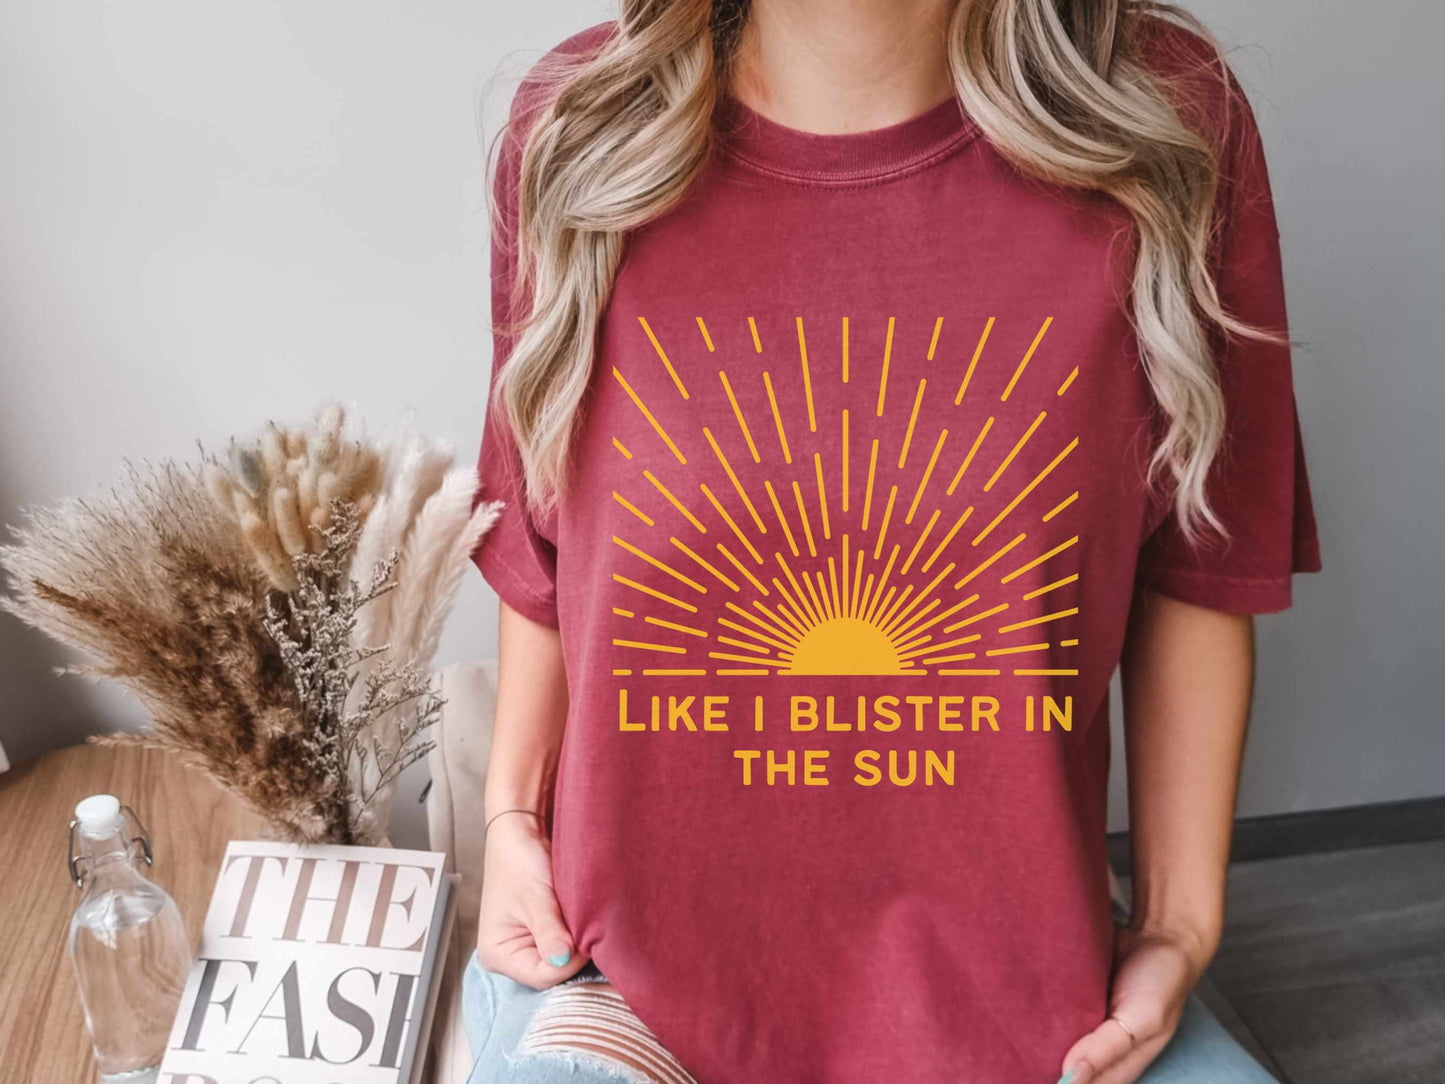 Violent Femmes "Blister in the Sun Tee" T-Shirt in Brick